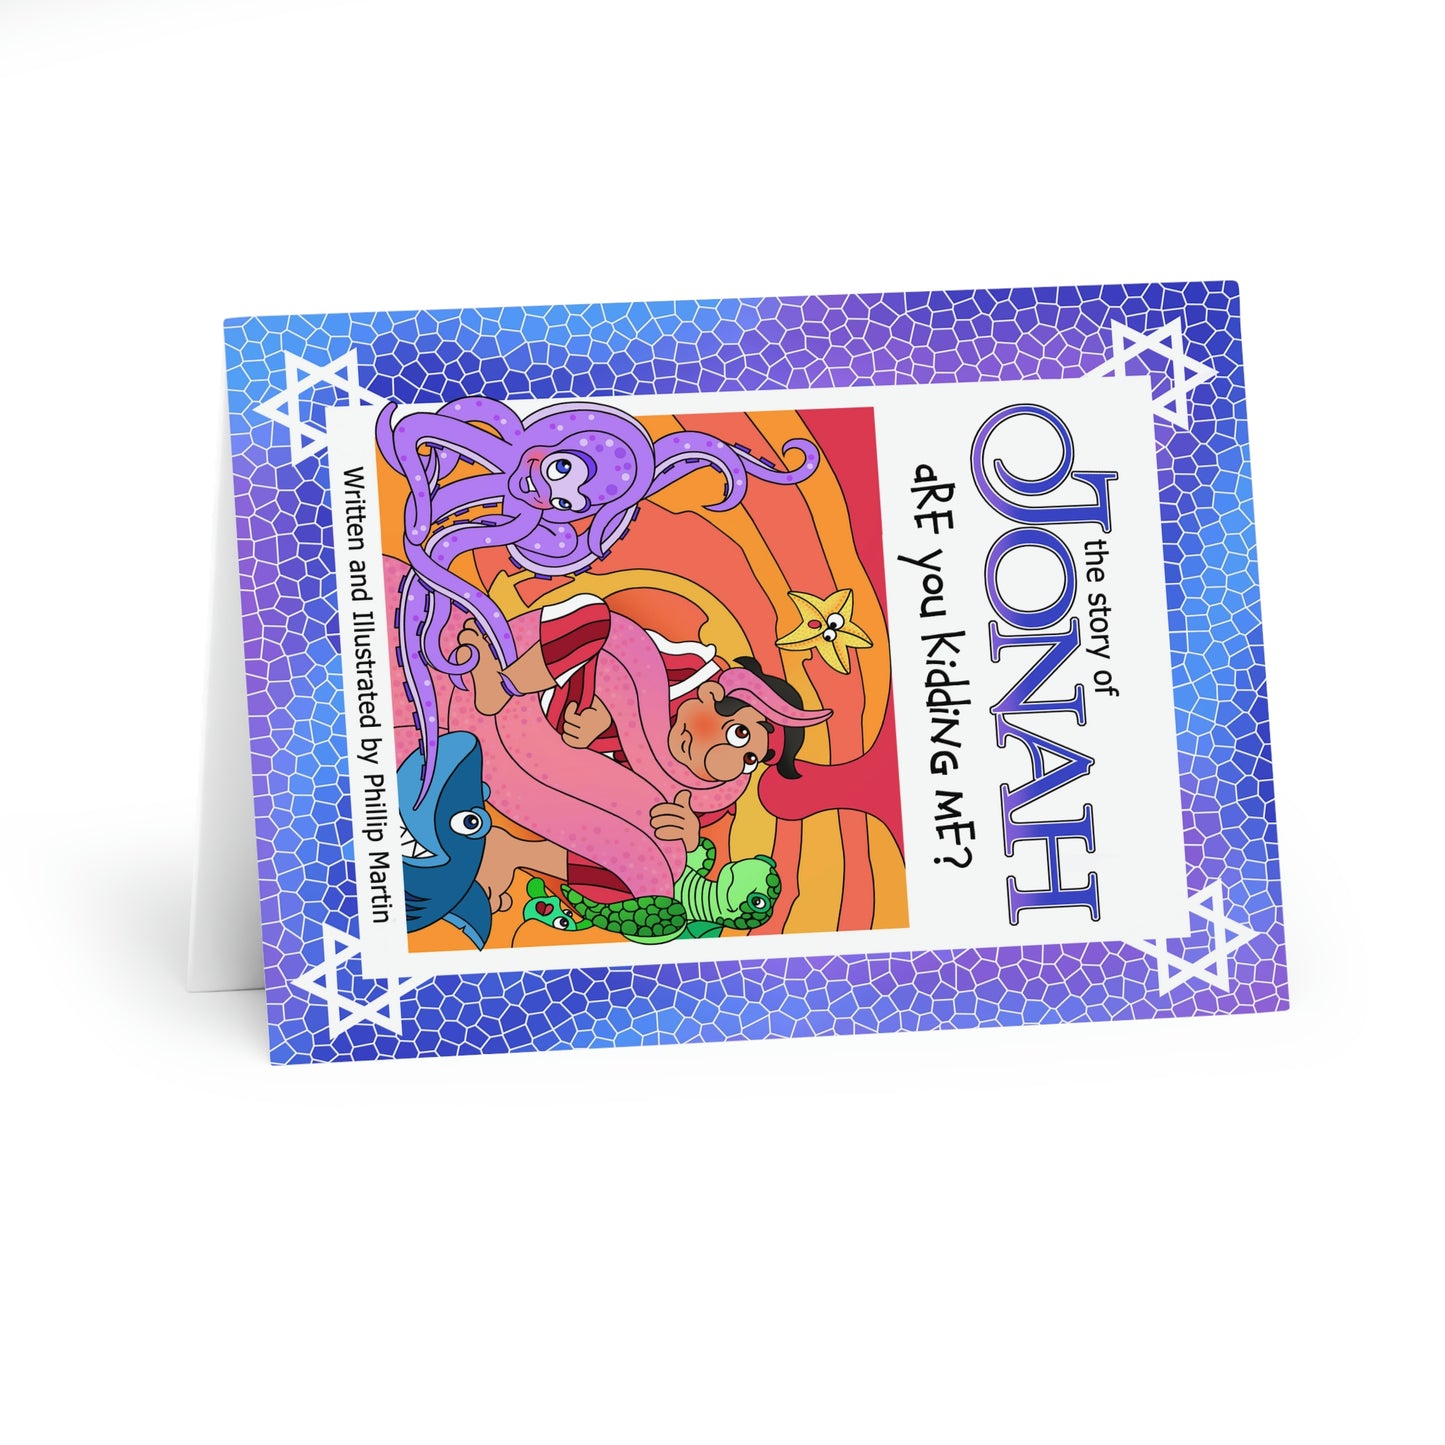 The Story of Jonah Greeting Cards (5 Pack)